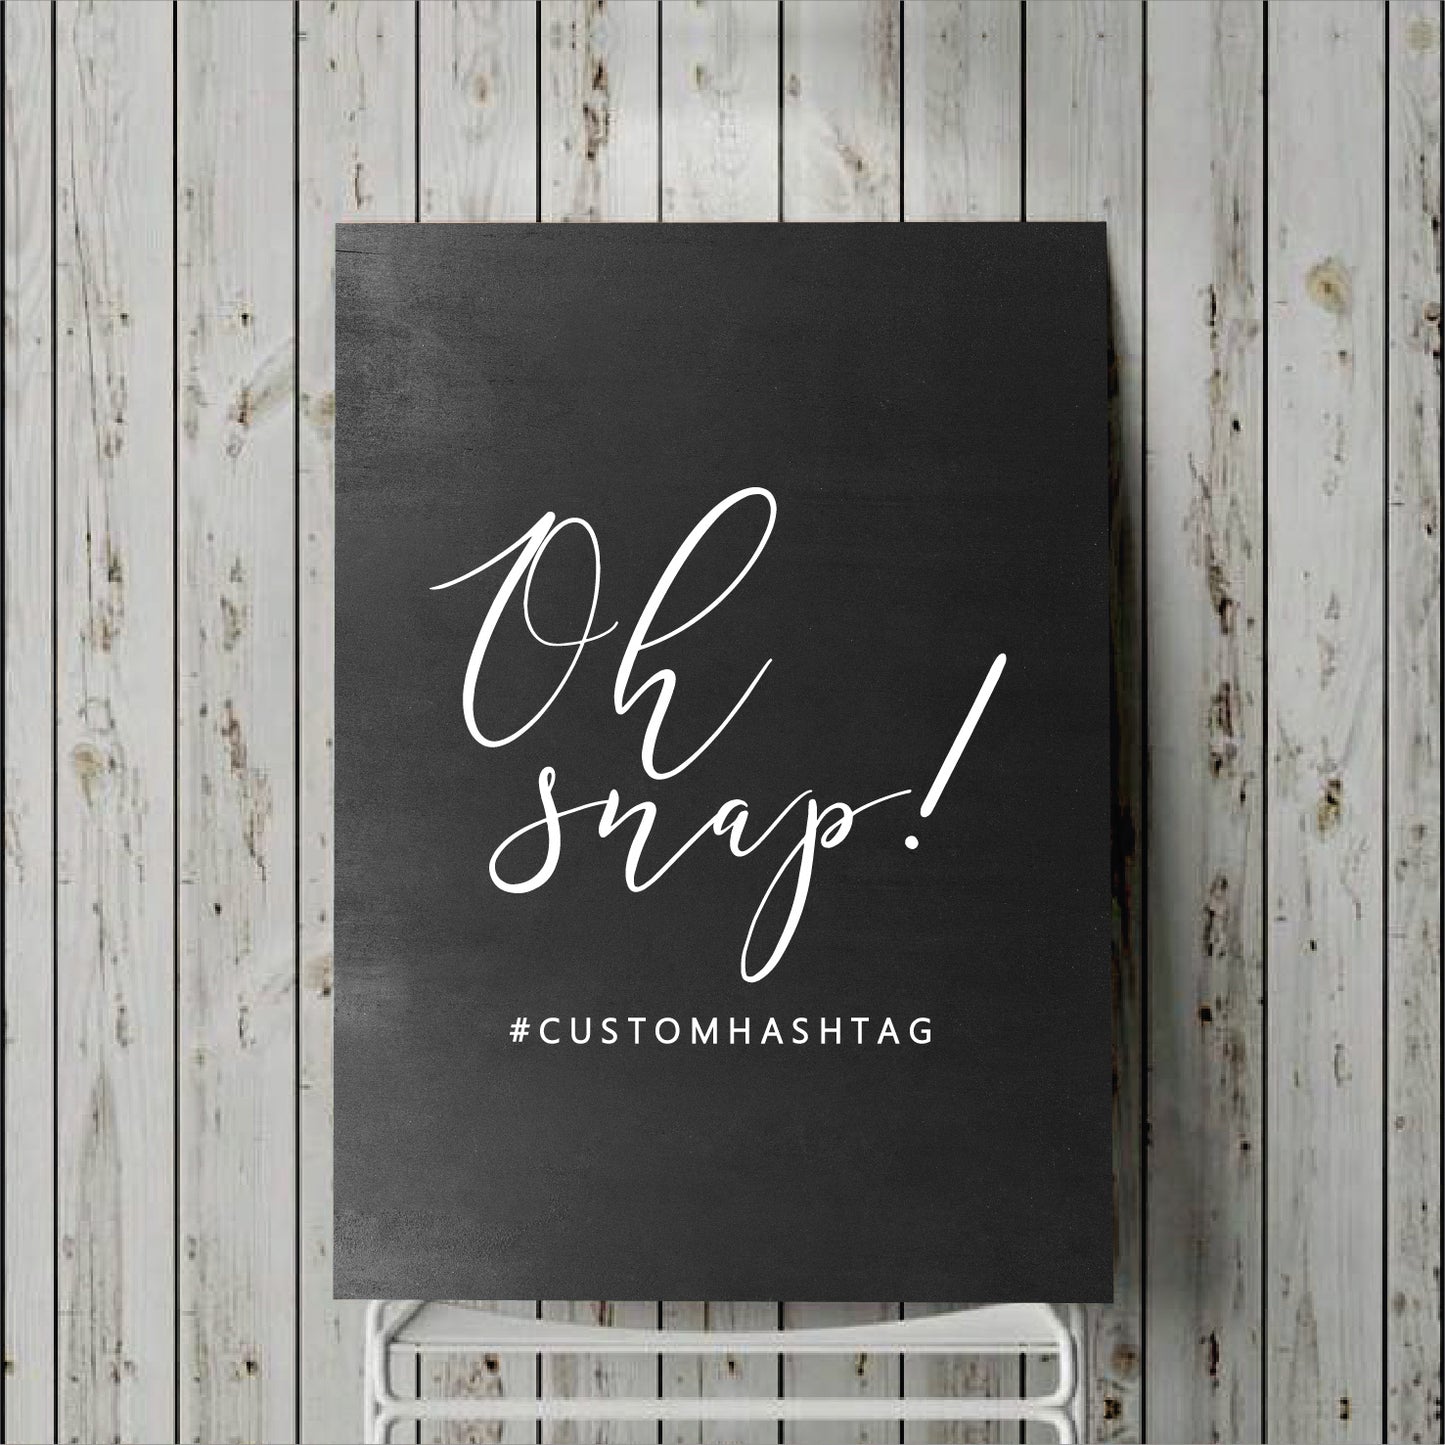 Oh Snap! Custom Hashtag For Wedding Sign - Decal